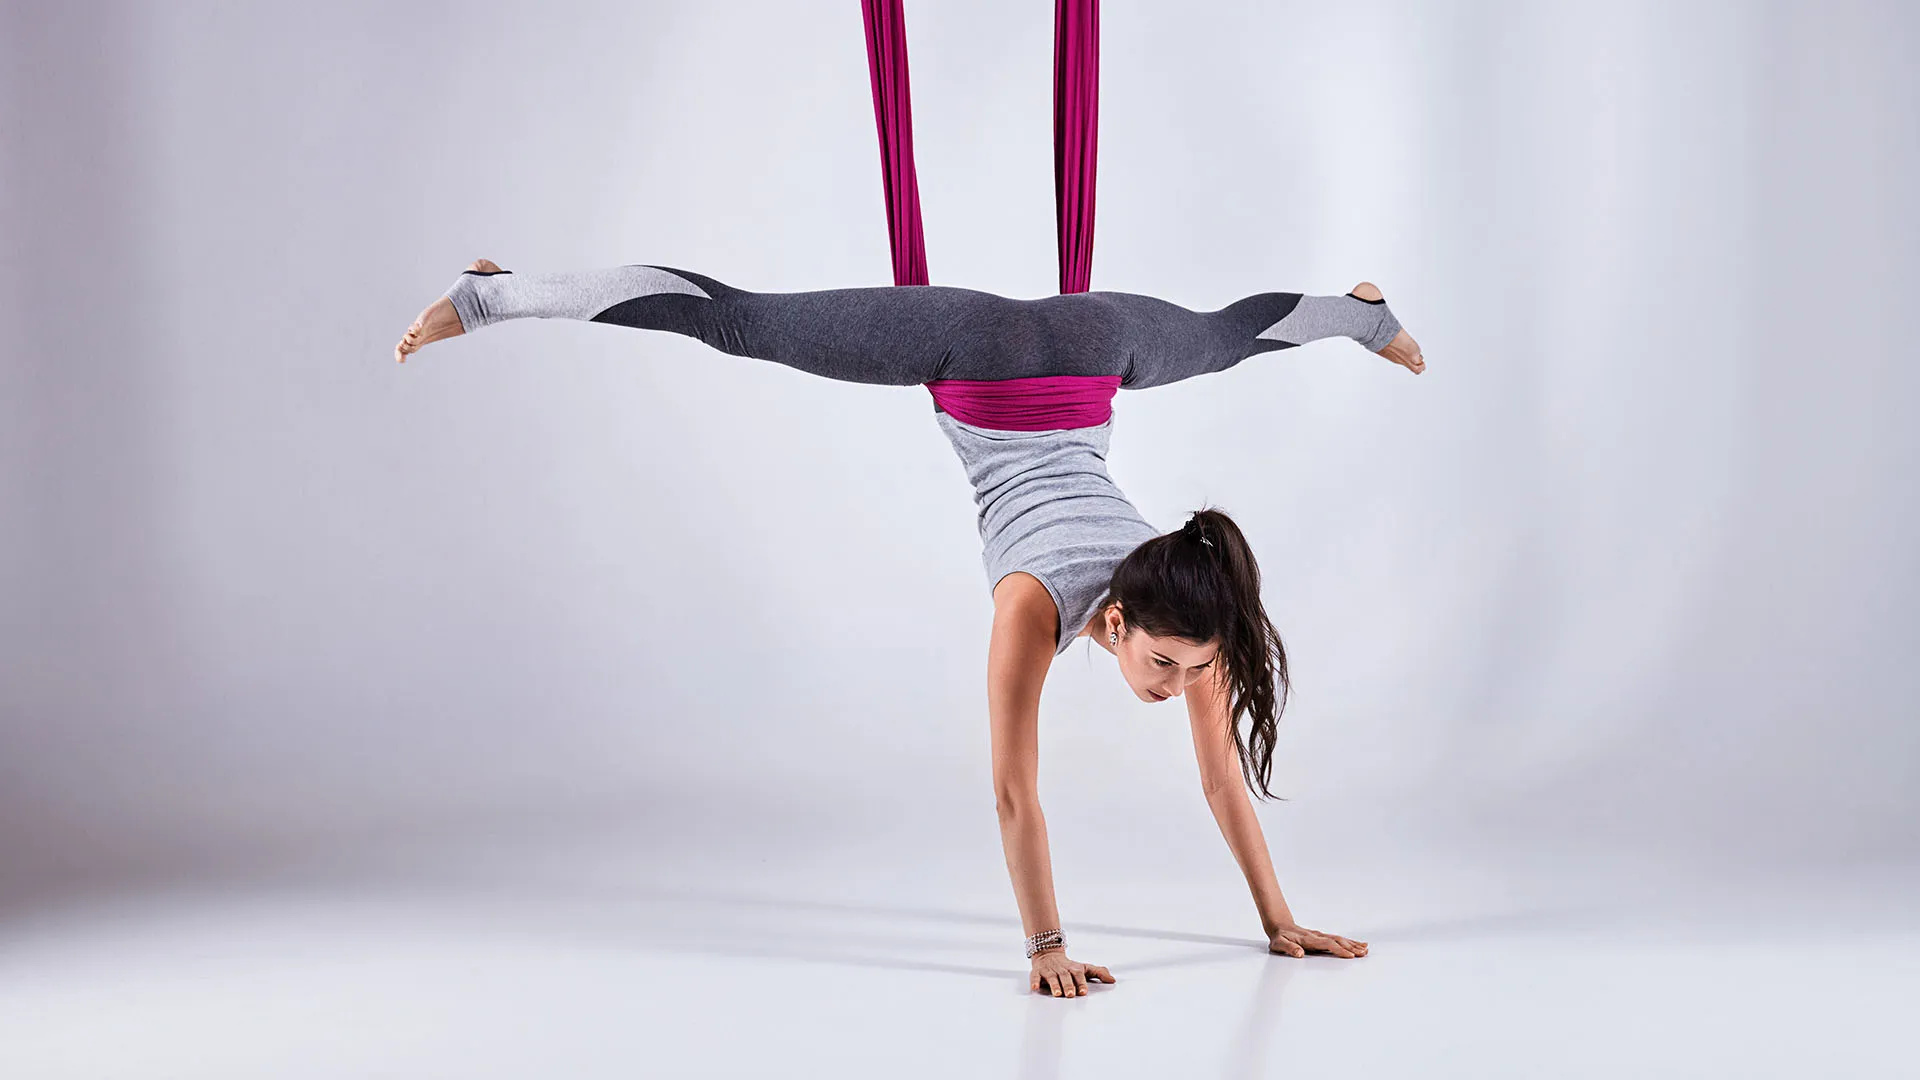 Aerial Silks: Anti-gravity yoga hand-stand exercise performed by a professional gymnast. 1920x1080 Full HD Wallpaper.